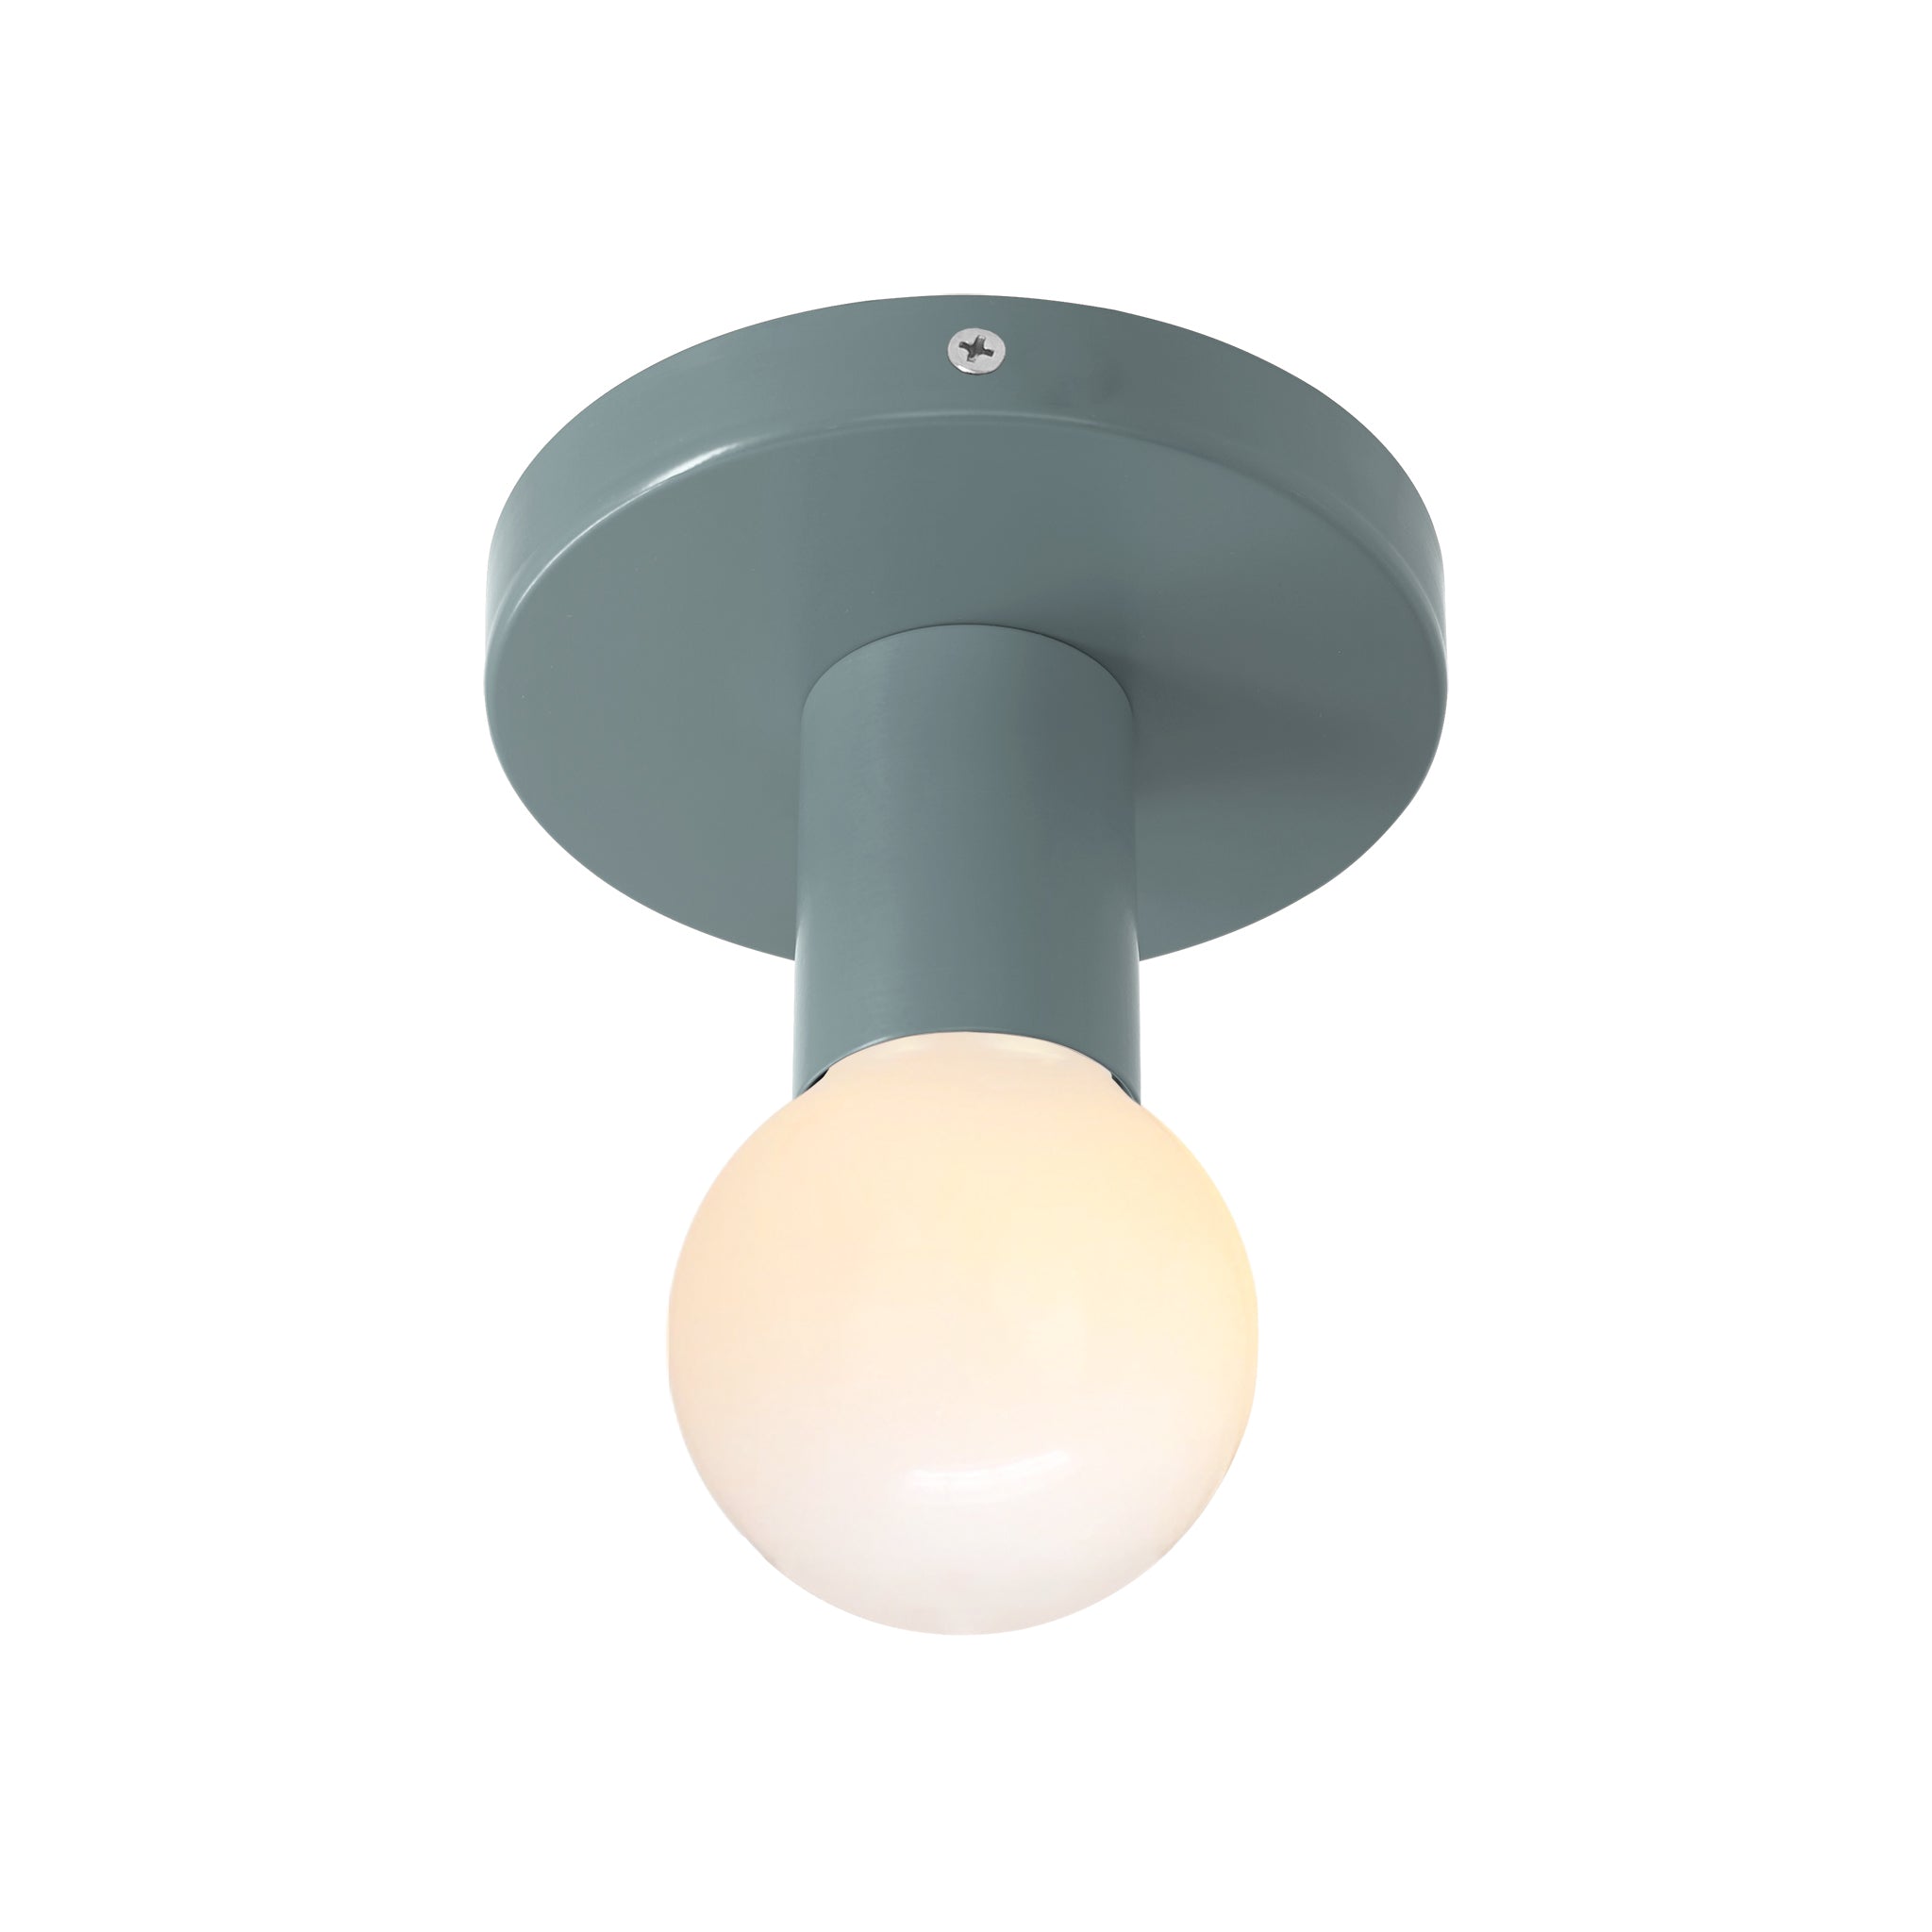 Nickel and python green color Twink flush mount Dutton Brown lighting